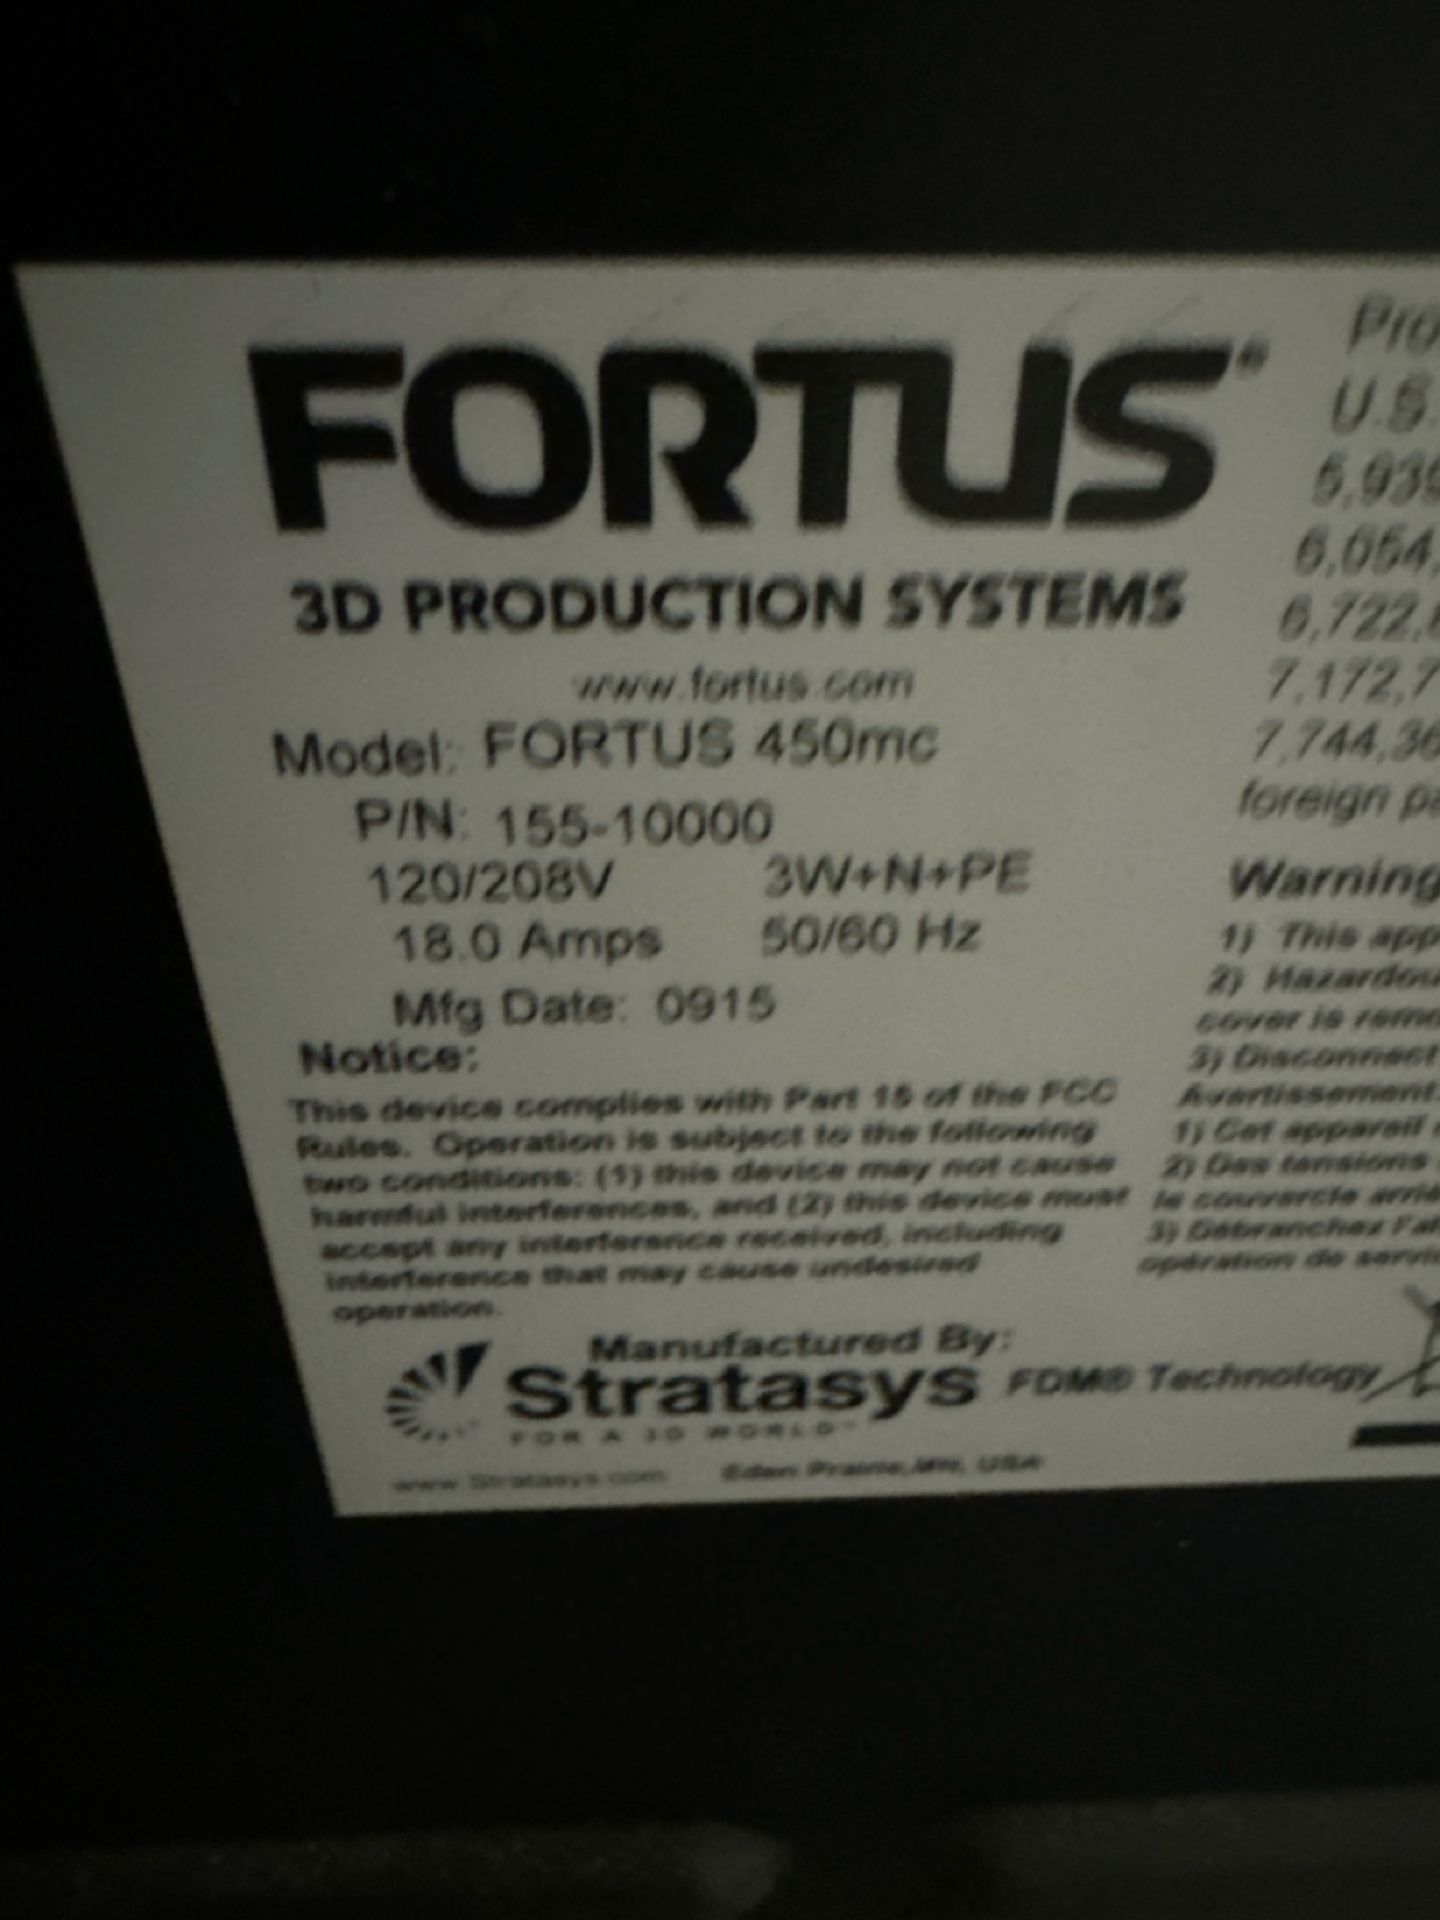 Stratasys Fortus 450mc 3D Production System Printer w/ Contents of Utility Cabinet - Image 6 of 17